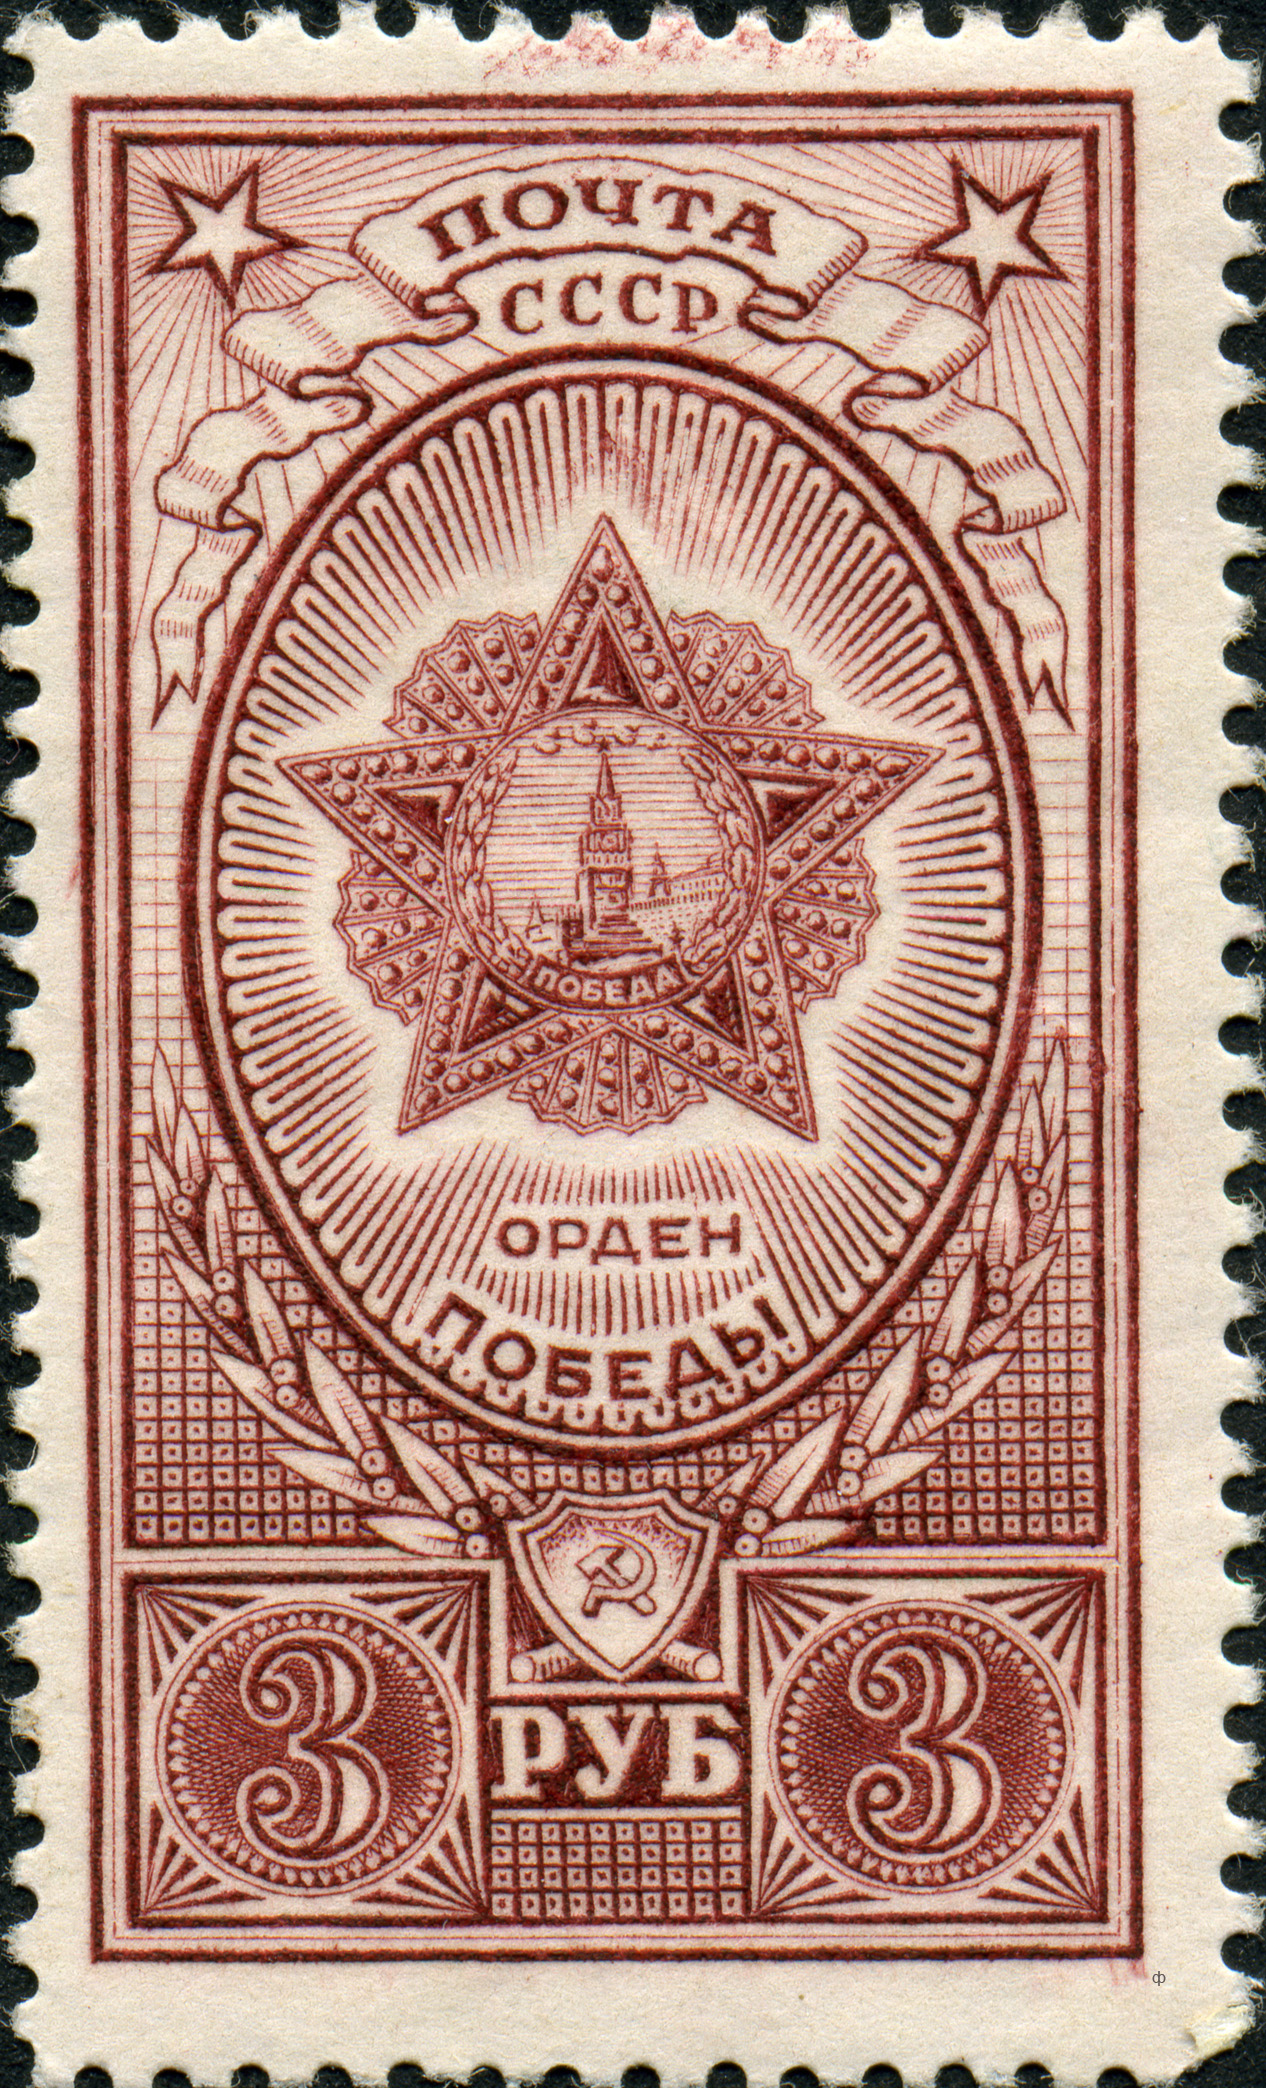 Awards of the USSR-1945. CPA 962-2